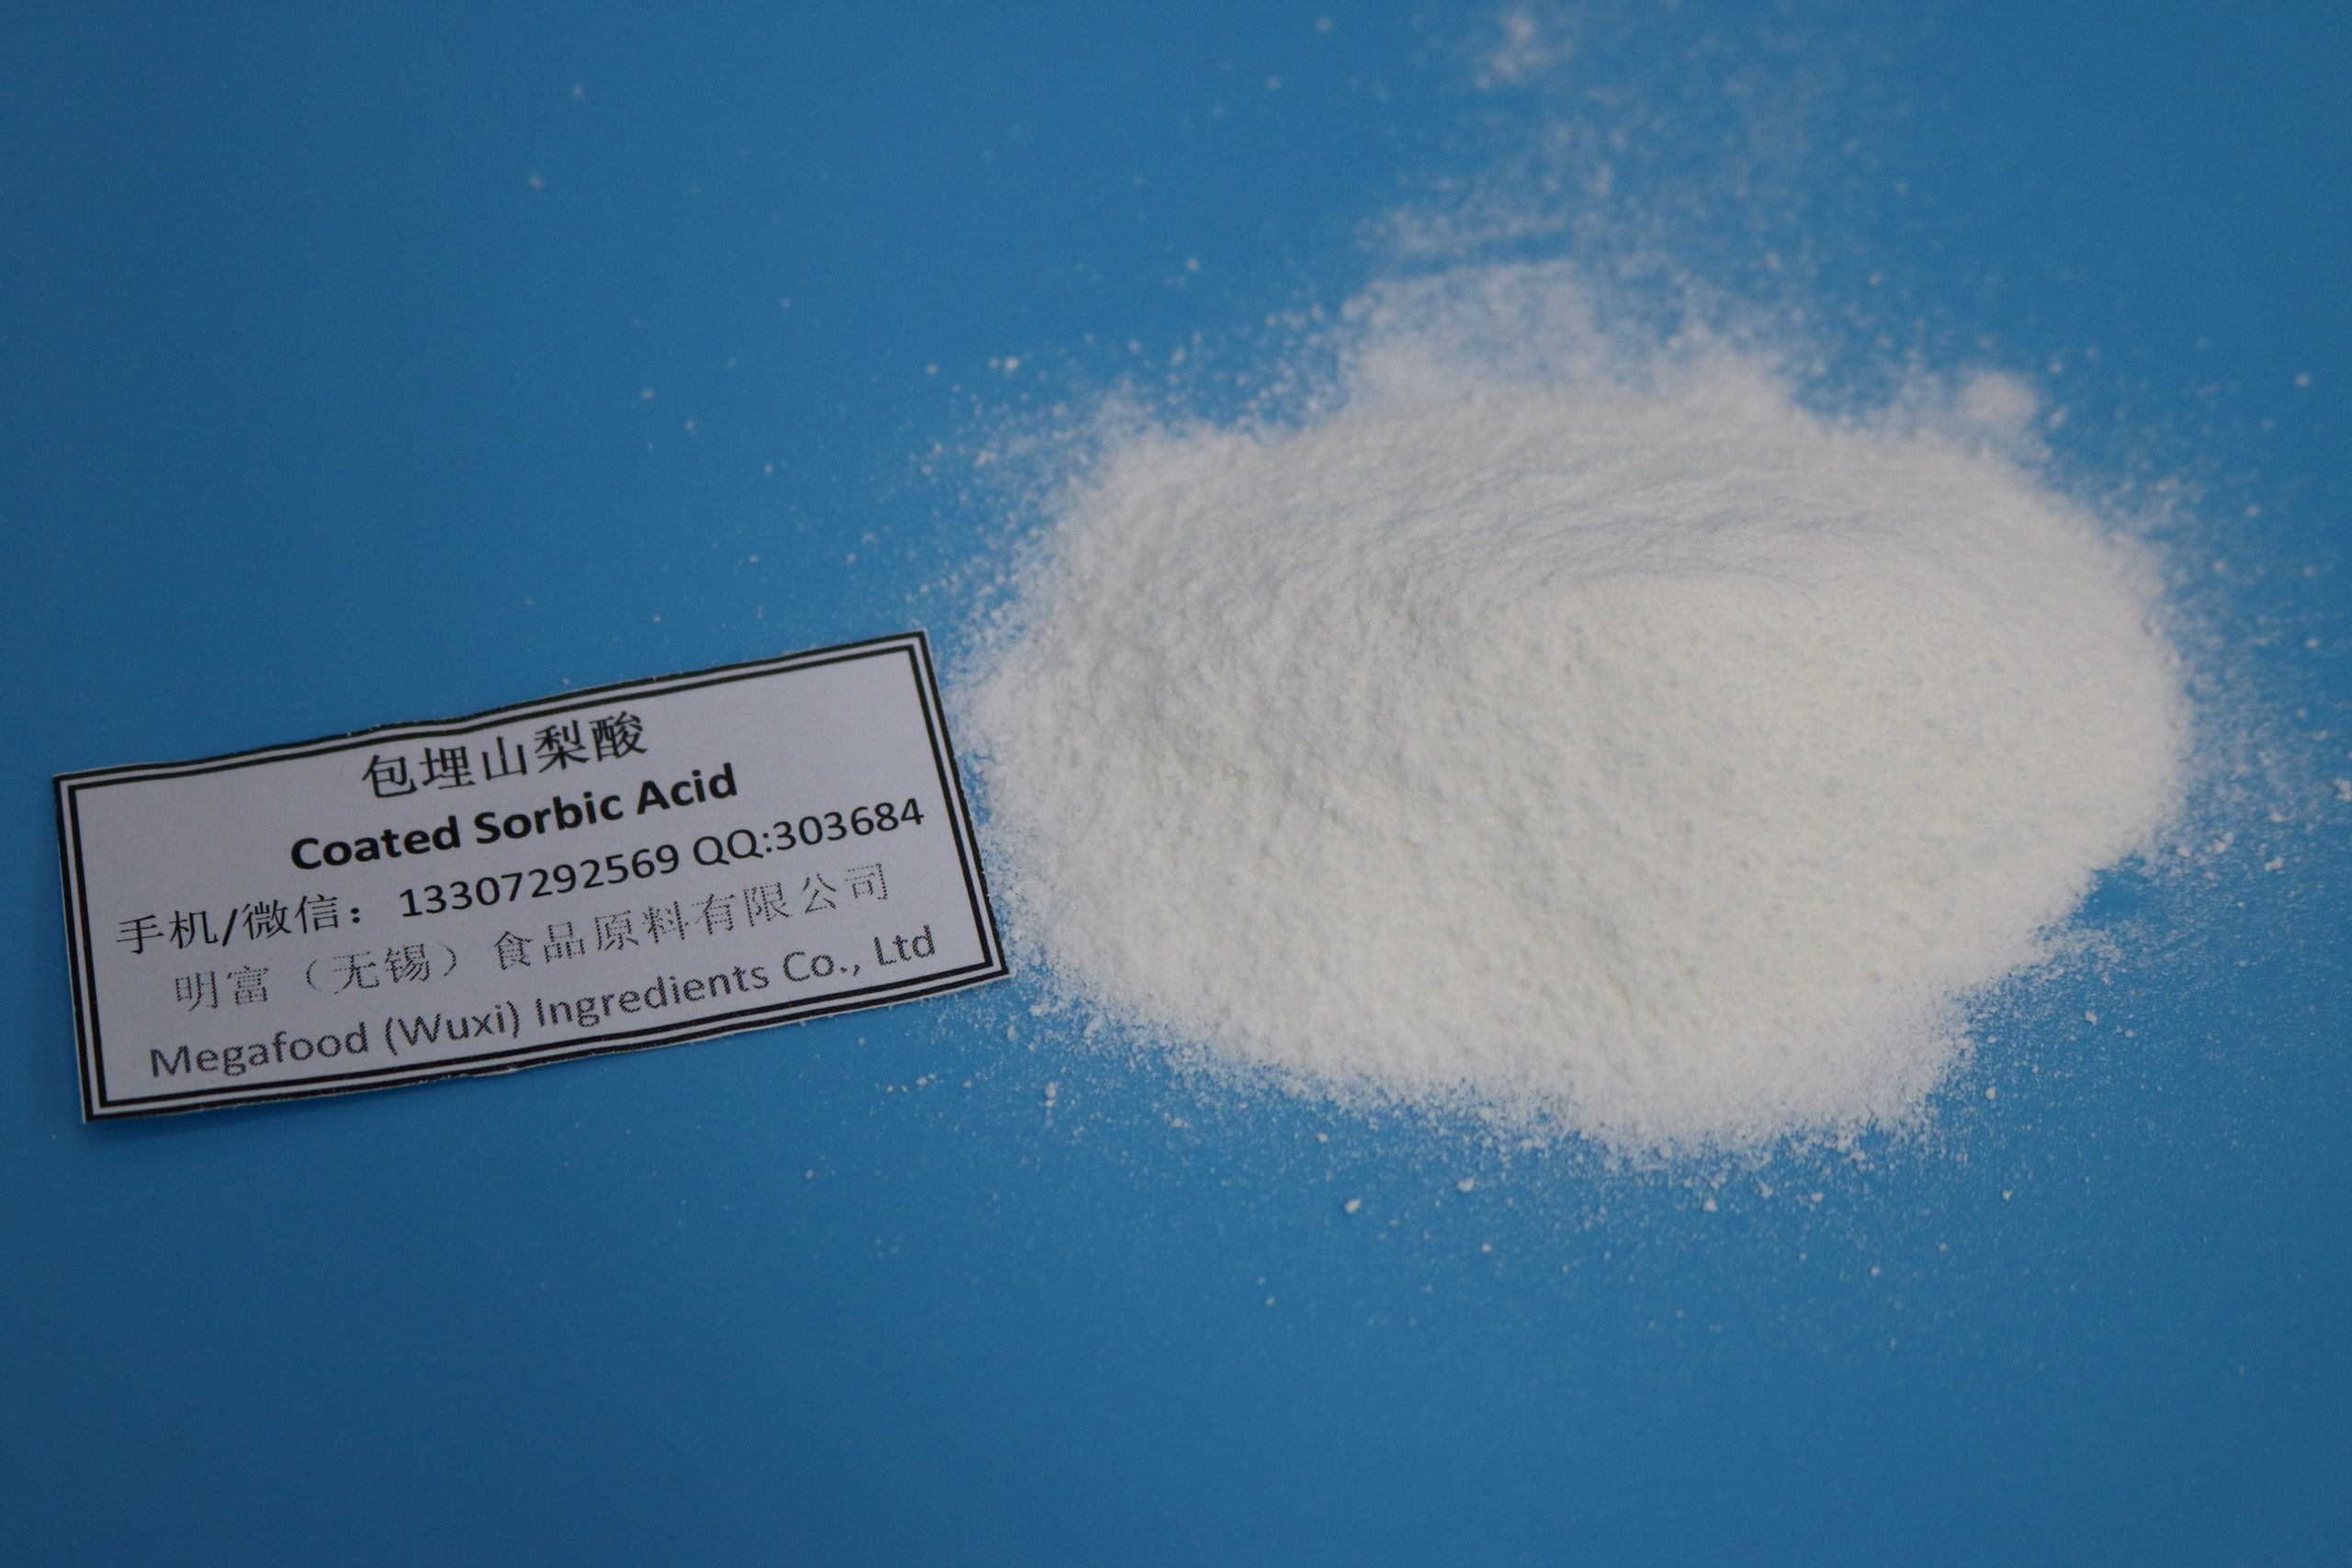 Produce Coated Sorbic Acid at Low Cost, Used as Preserving Agent